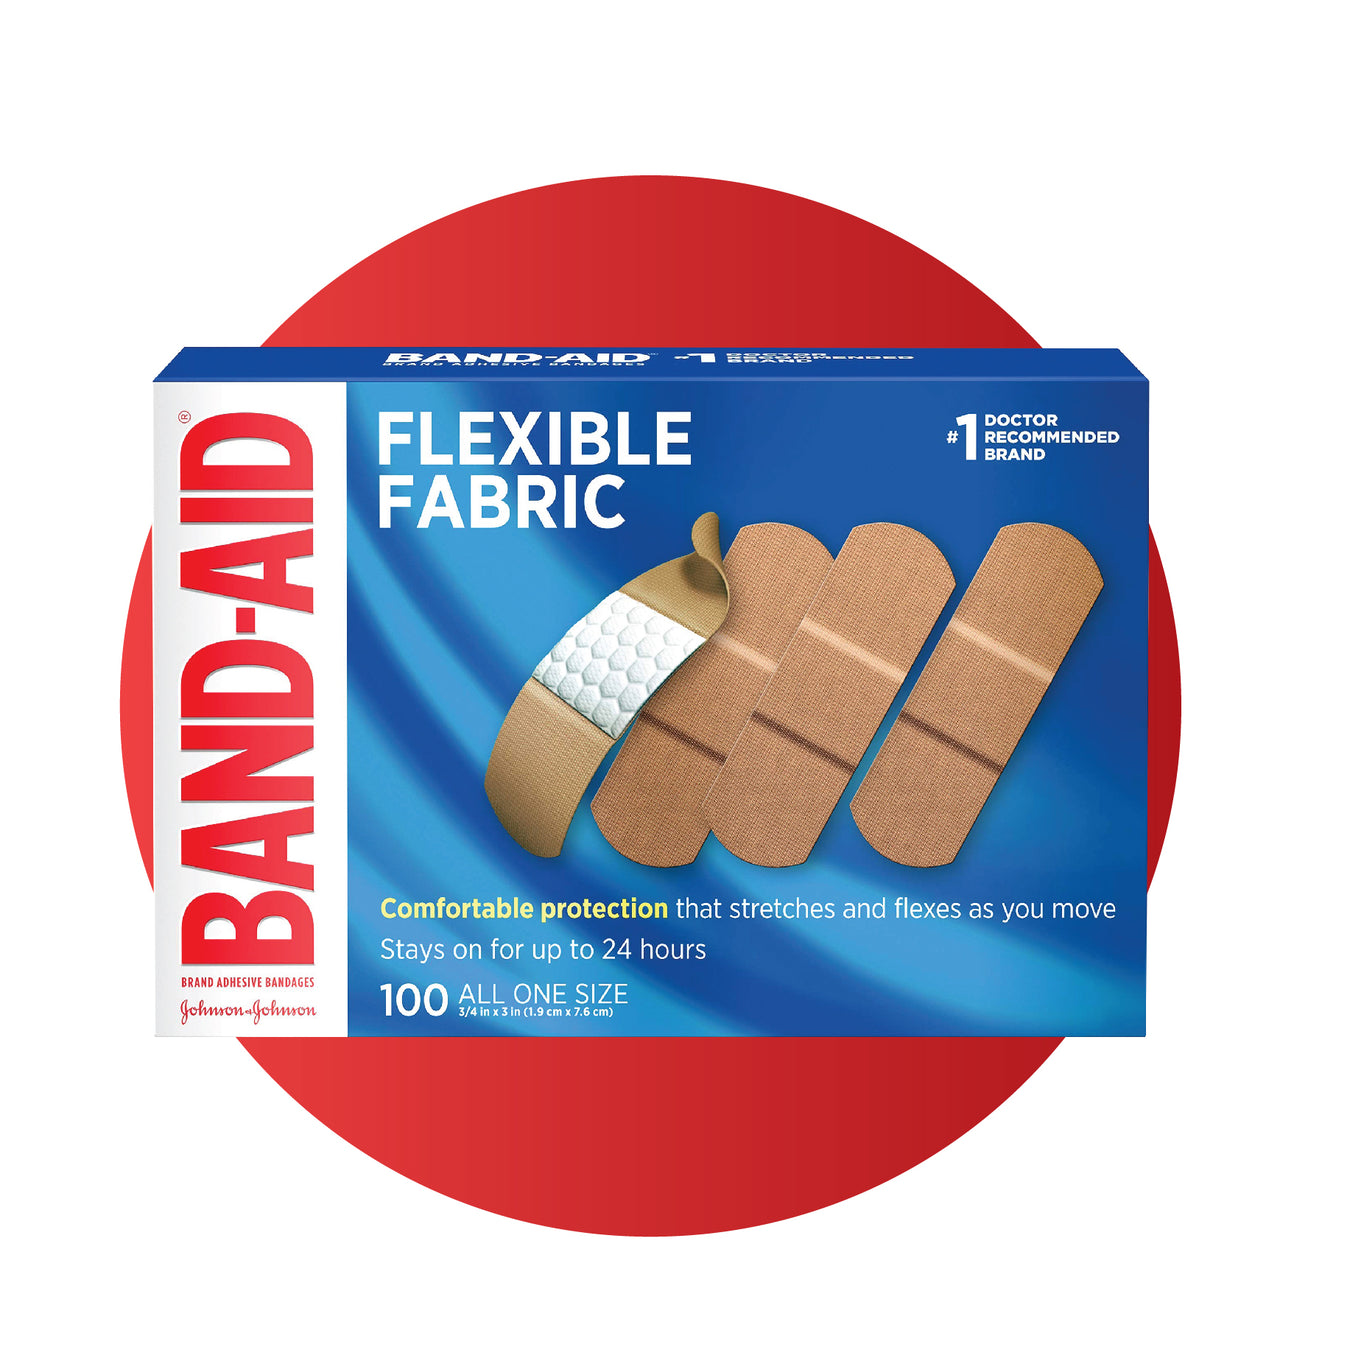 FSA/HSA Eligible Essential First Aid Supplies - Shop Home Med